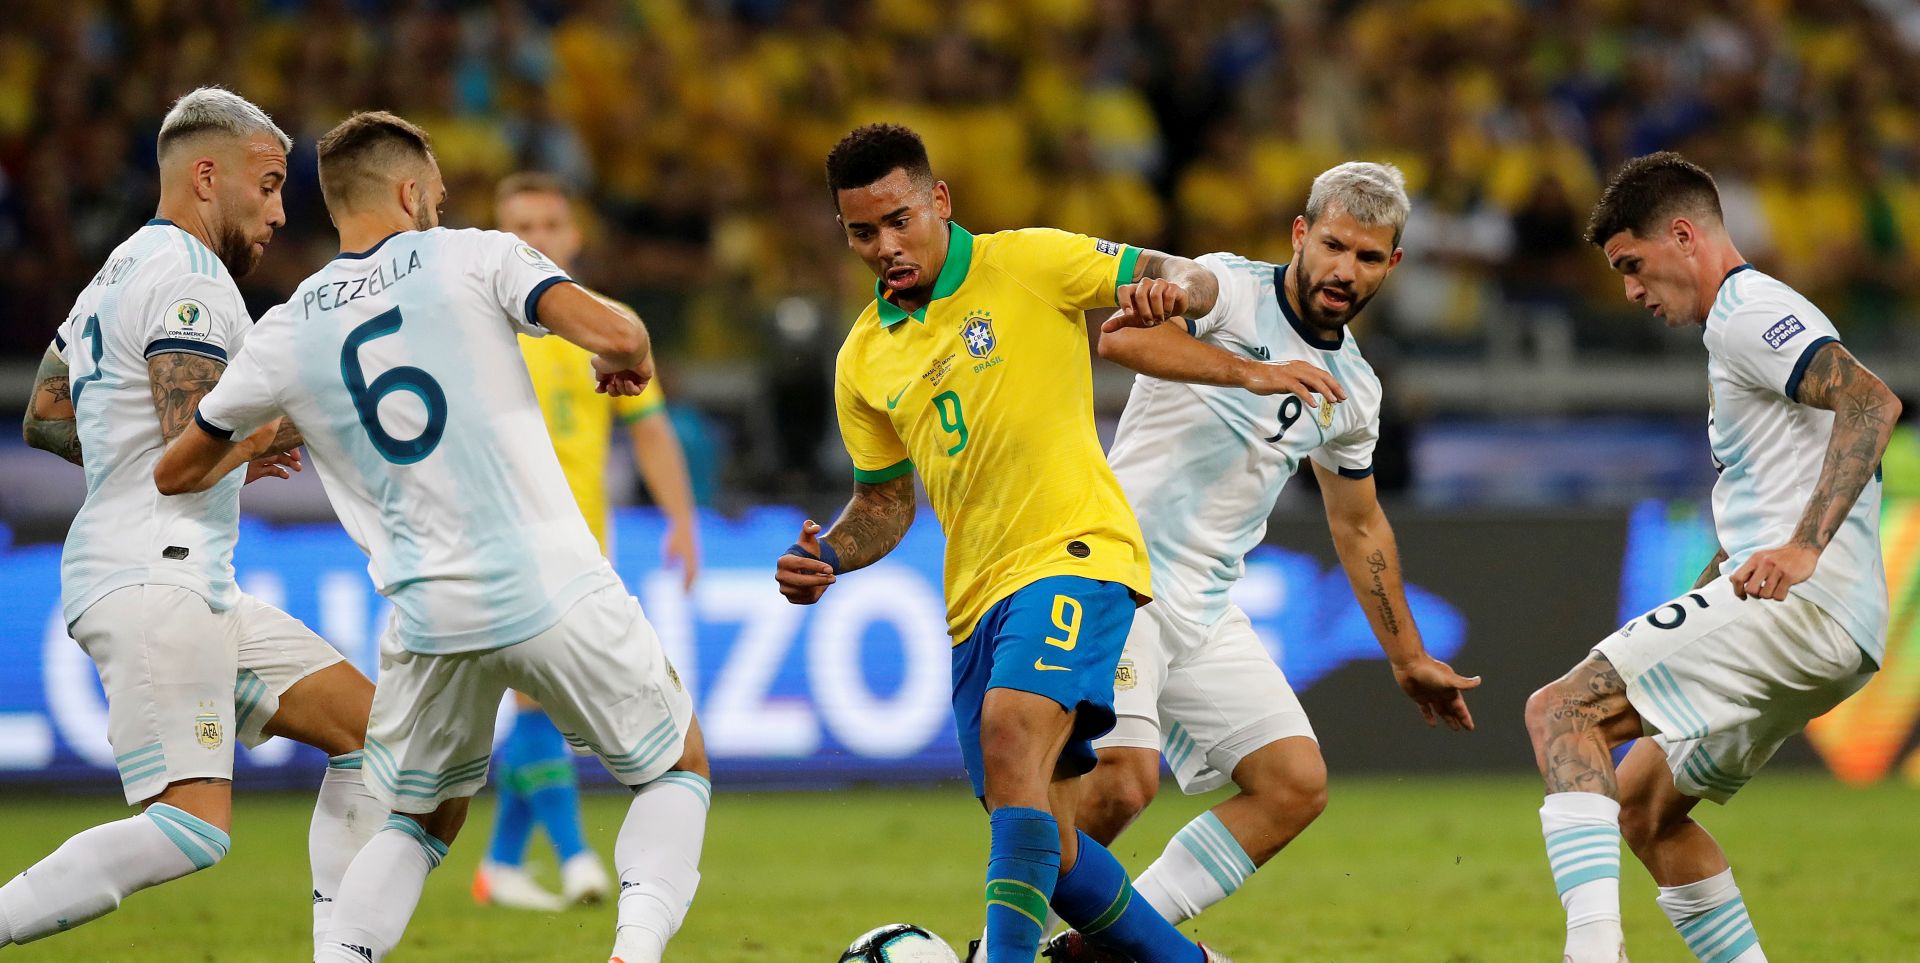 epa07690926 Brazil's Gabriel Jesus (C) in action against Argentina's players German Pezzella (2-L), Sergio Aguero (2-R) and Leandro Paredes (R) during the Copa America 2019 semi-finals soccer match between Brazil and Argentina at Mineirao Stadium in Belo Horizonte, Brazil, 02 July 2019.  EPA/Antonio Lacerda